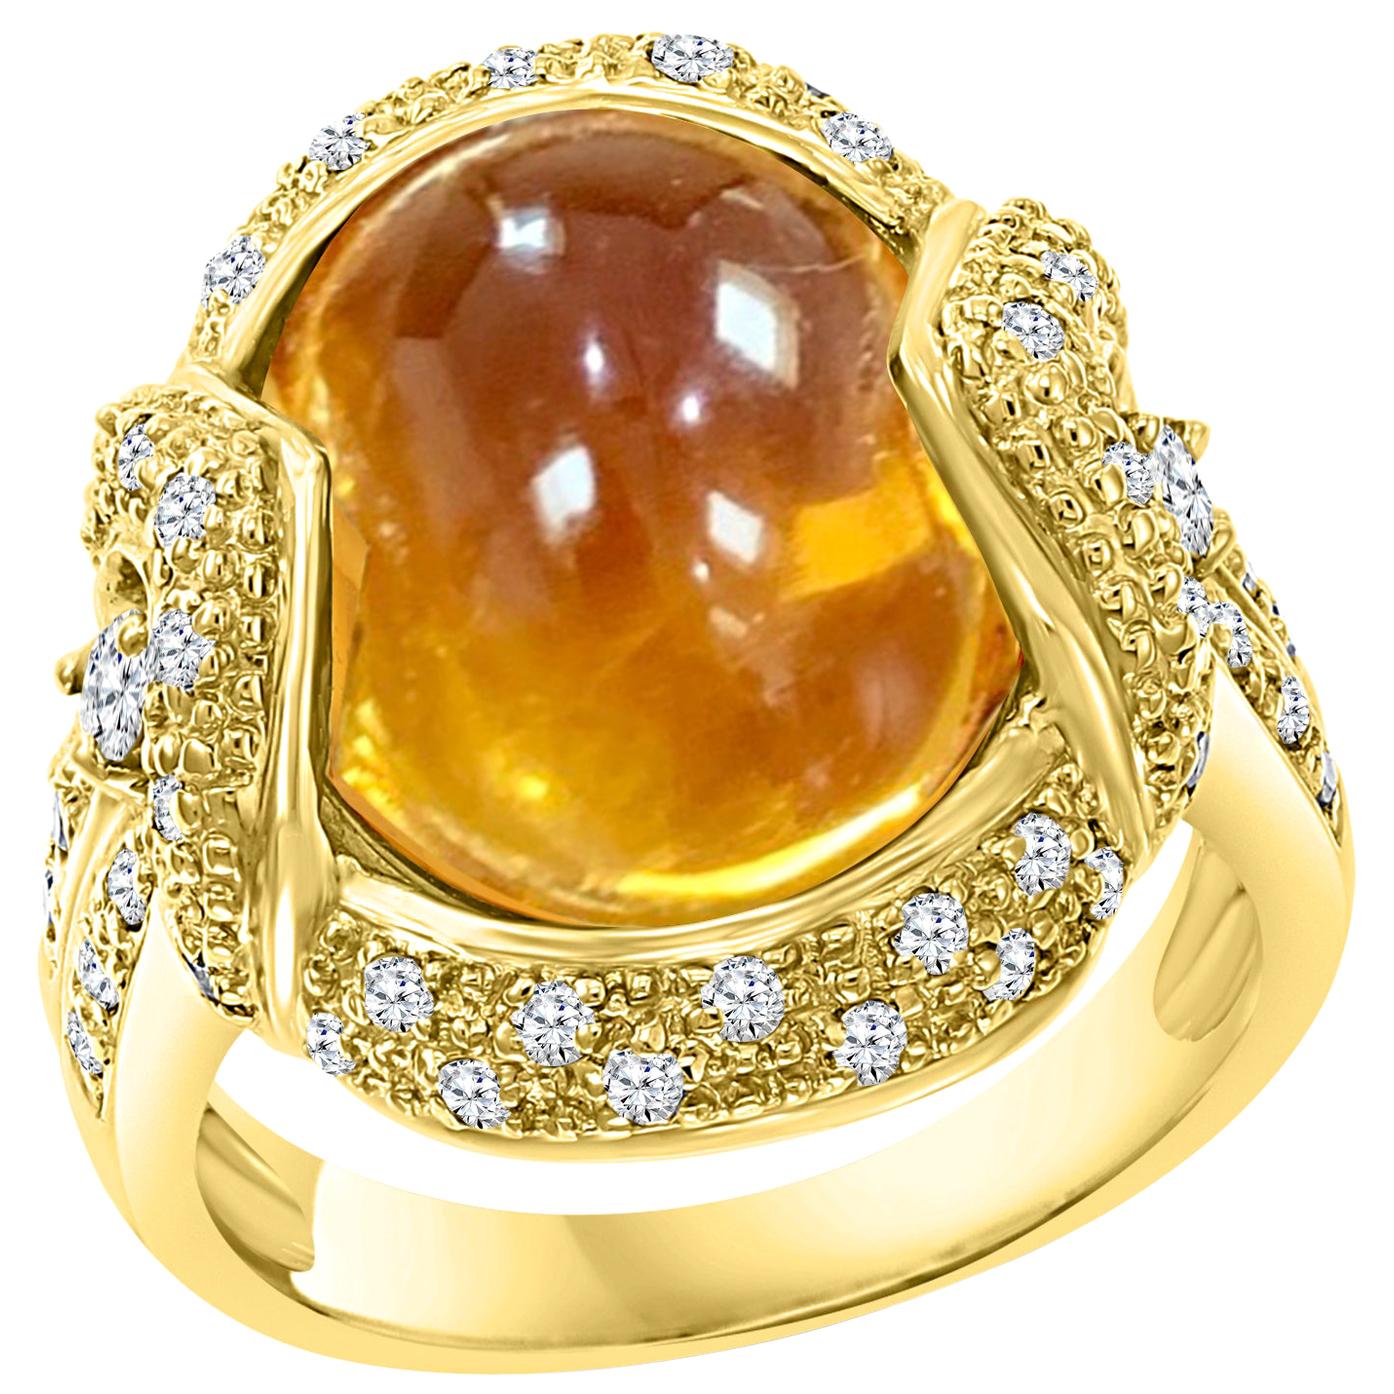 9 Carat Oval Citrine Cabochon and Diamond Ring in 18 Karat Yellow Gold, Estate